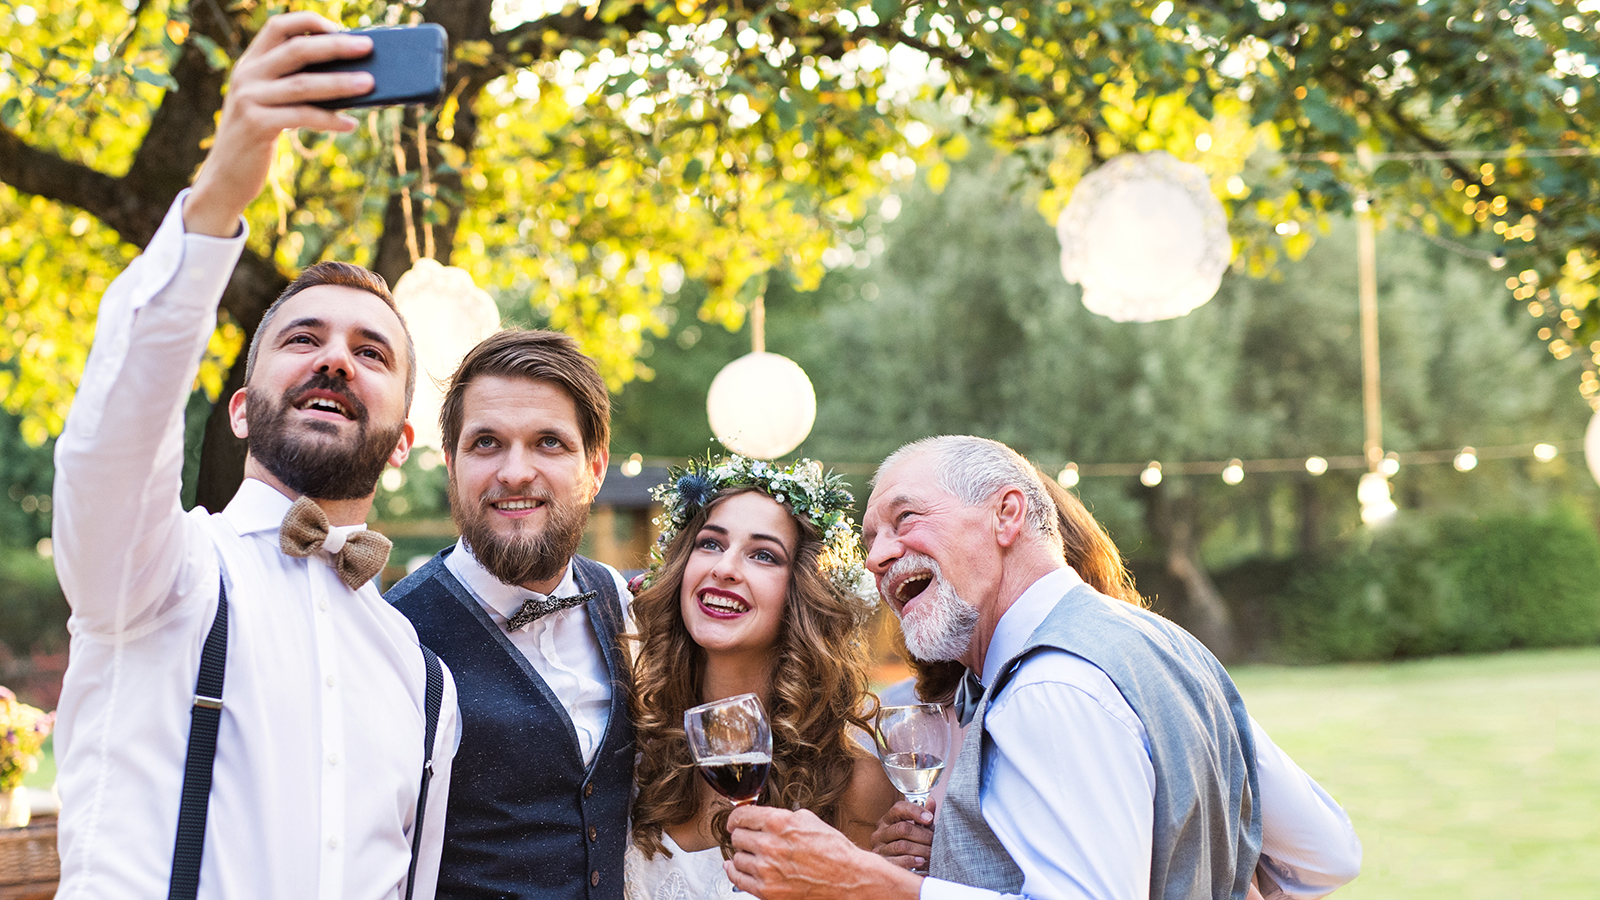 Happy bride, groom and guests with smartphone taking selfie outside at wedding reception.